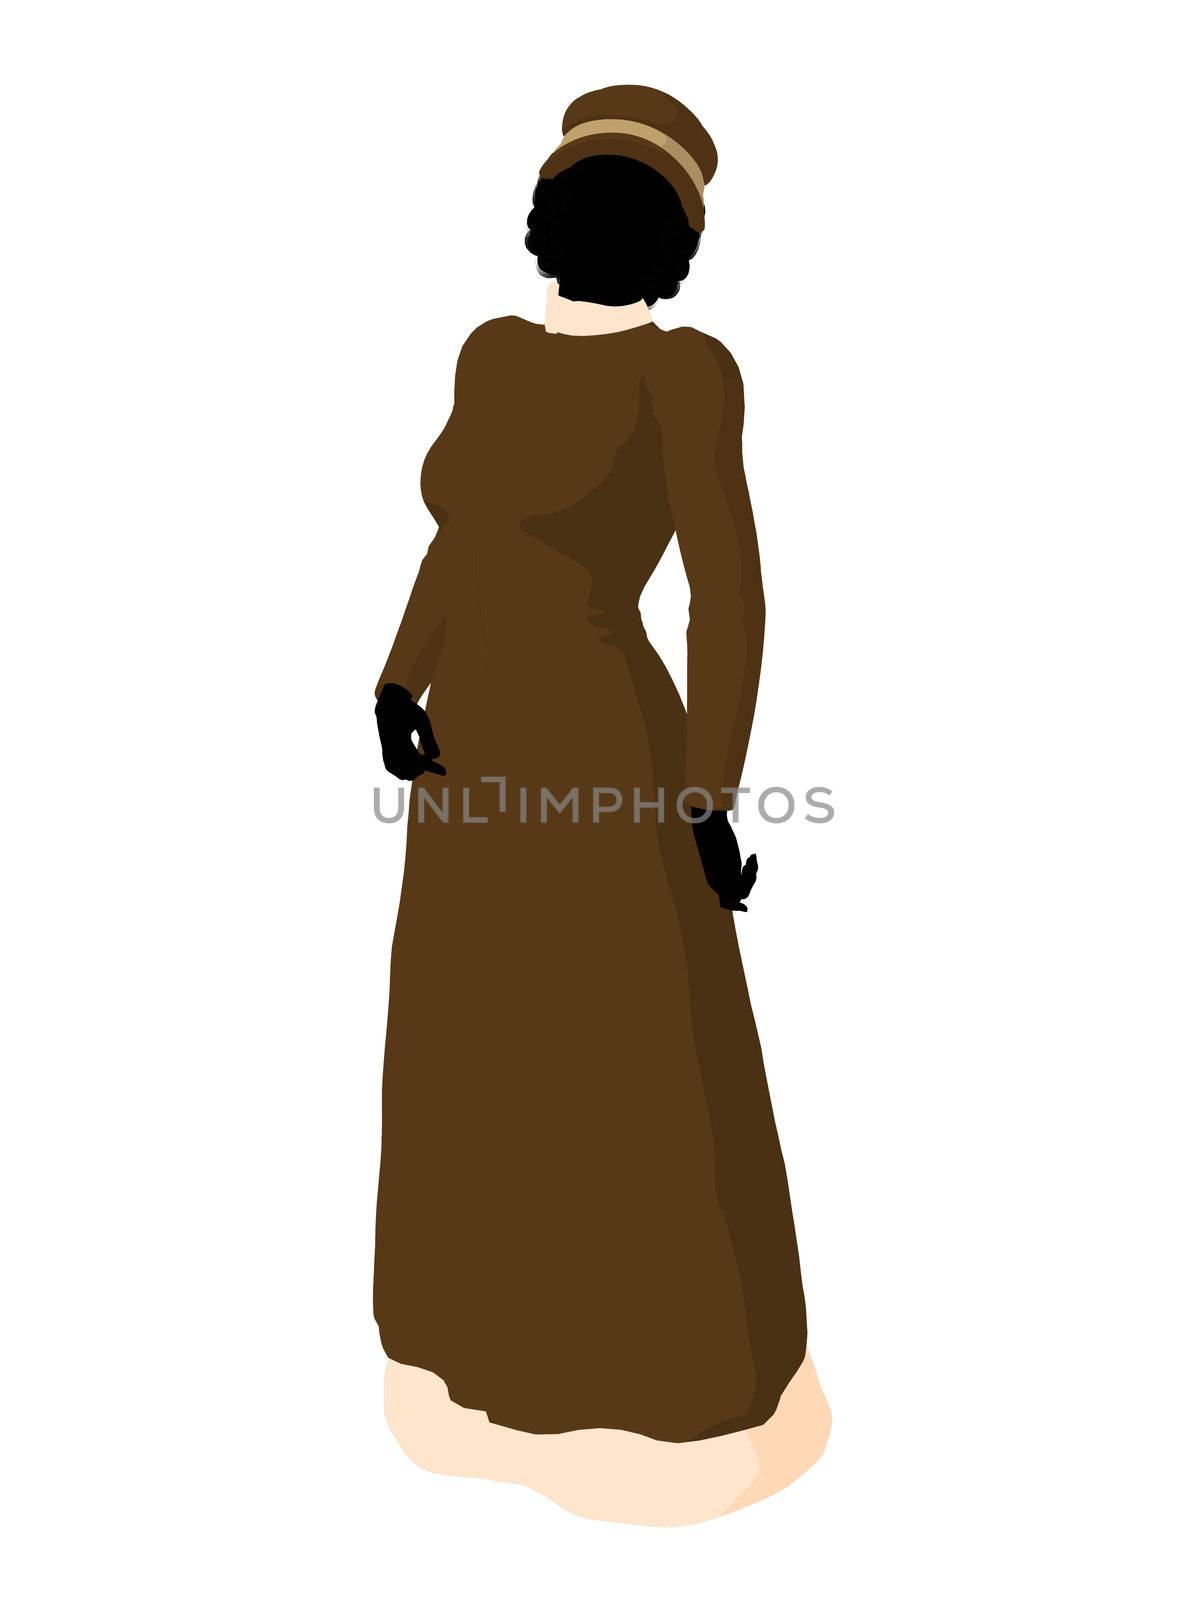 Victorian Woman Illustration Silhouette by kathygold